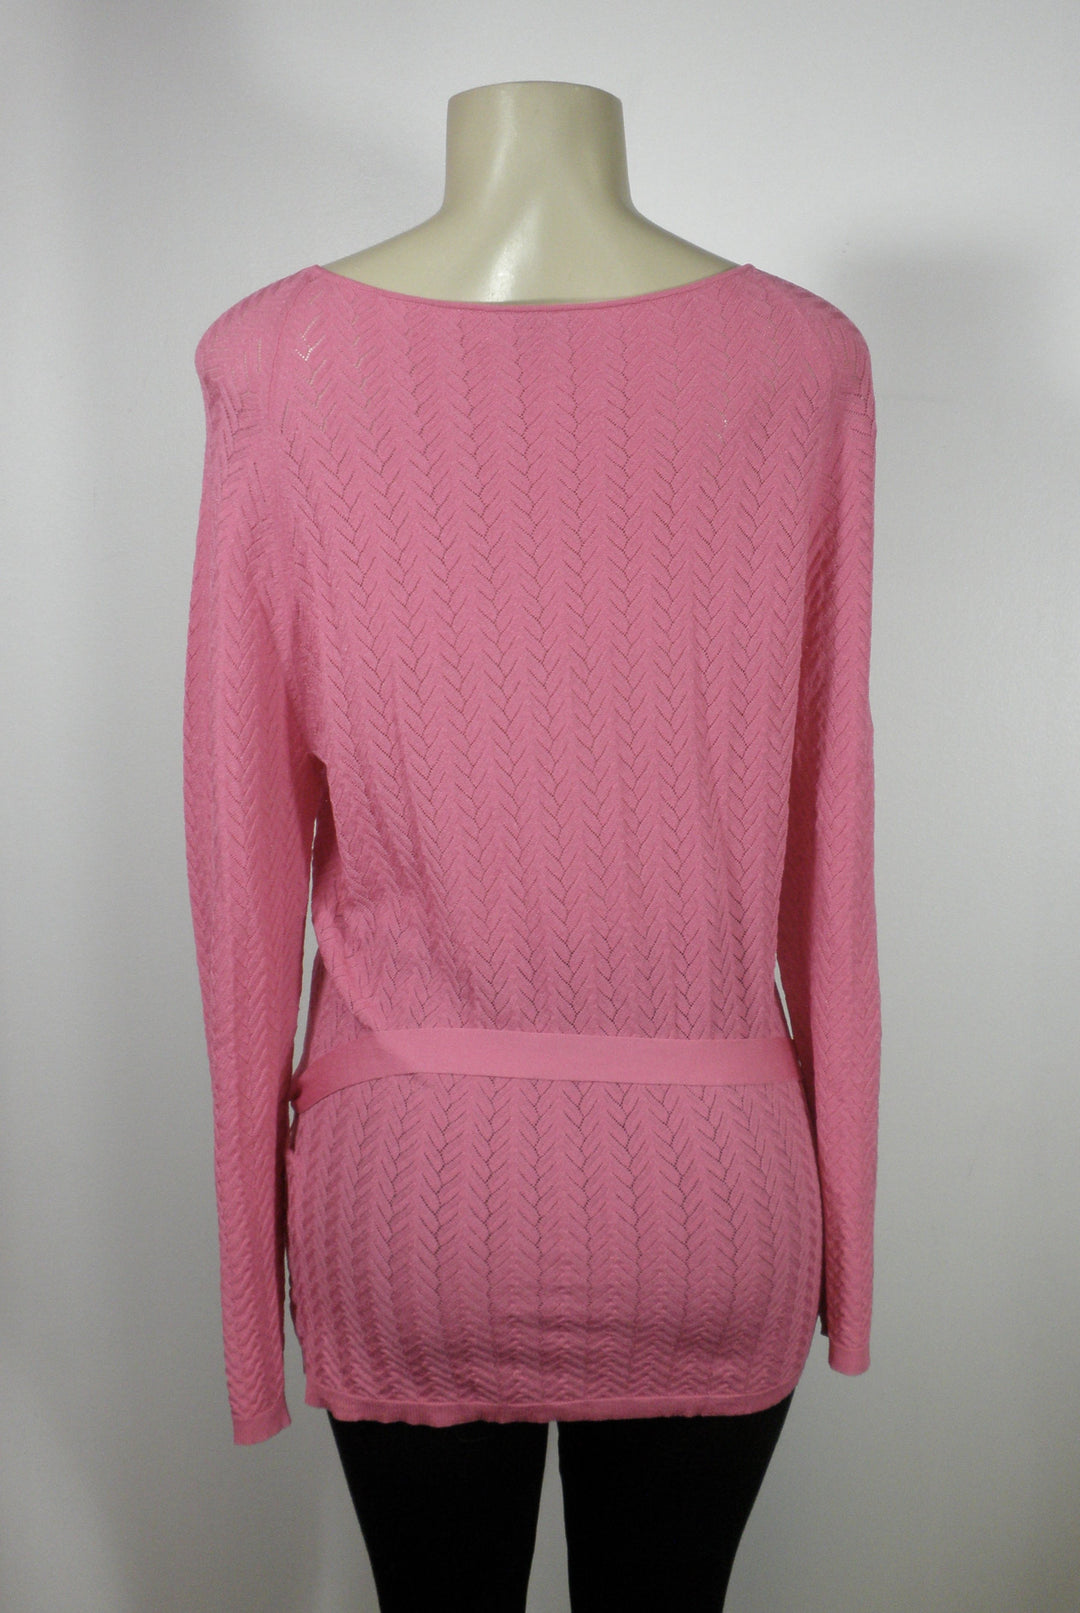 Lafayette 148 Pink Tie Waste Top - Size Medium - Donated From The Designer - The Fashion Foundation